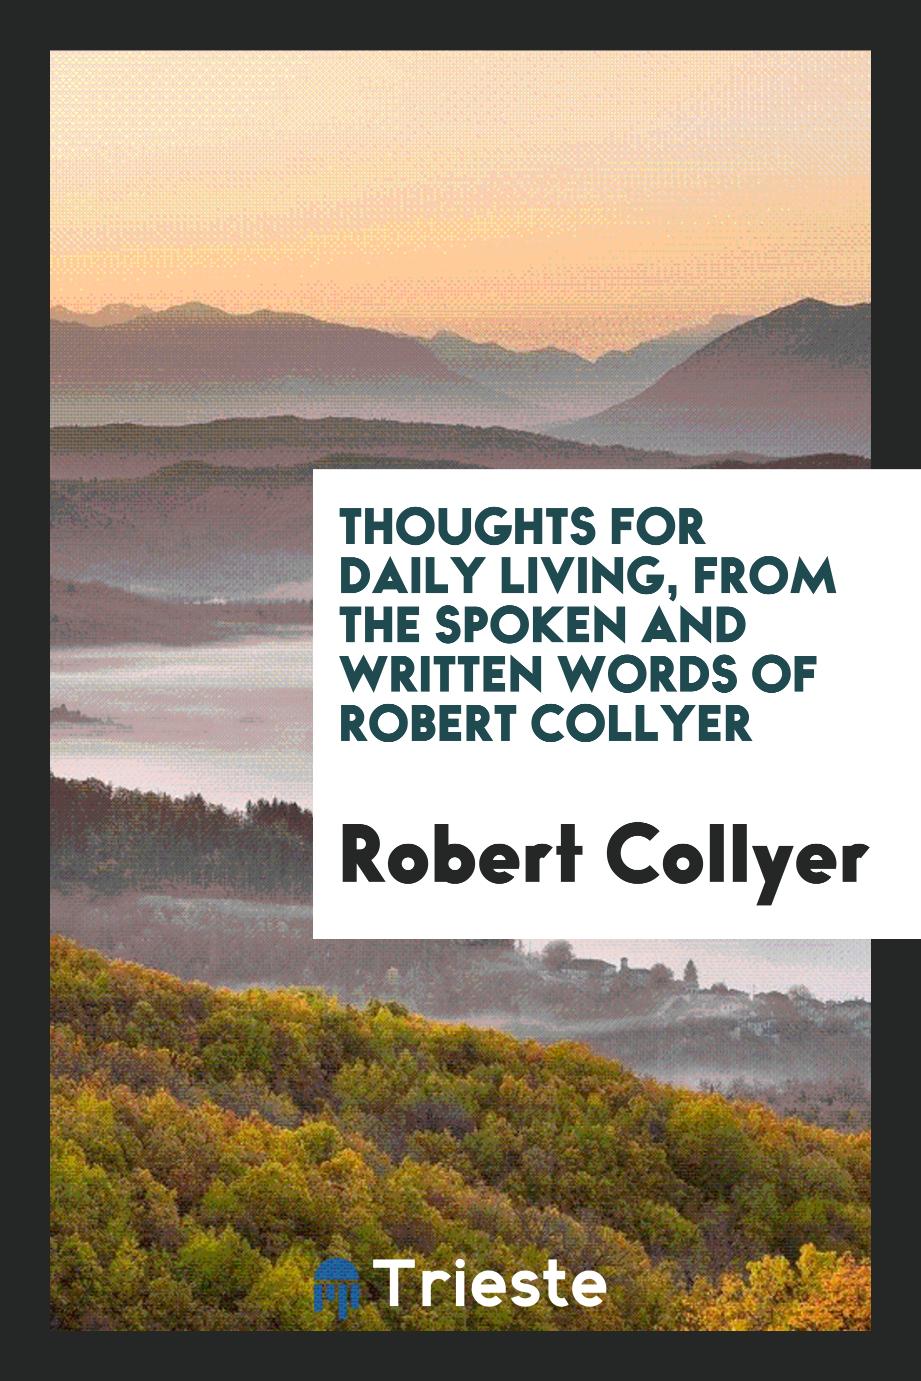 Thoughts for Daily Living, from the Spoken and Written Words of Robert Collyer